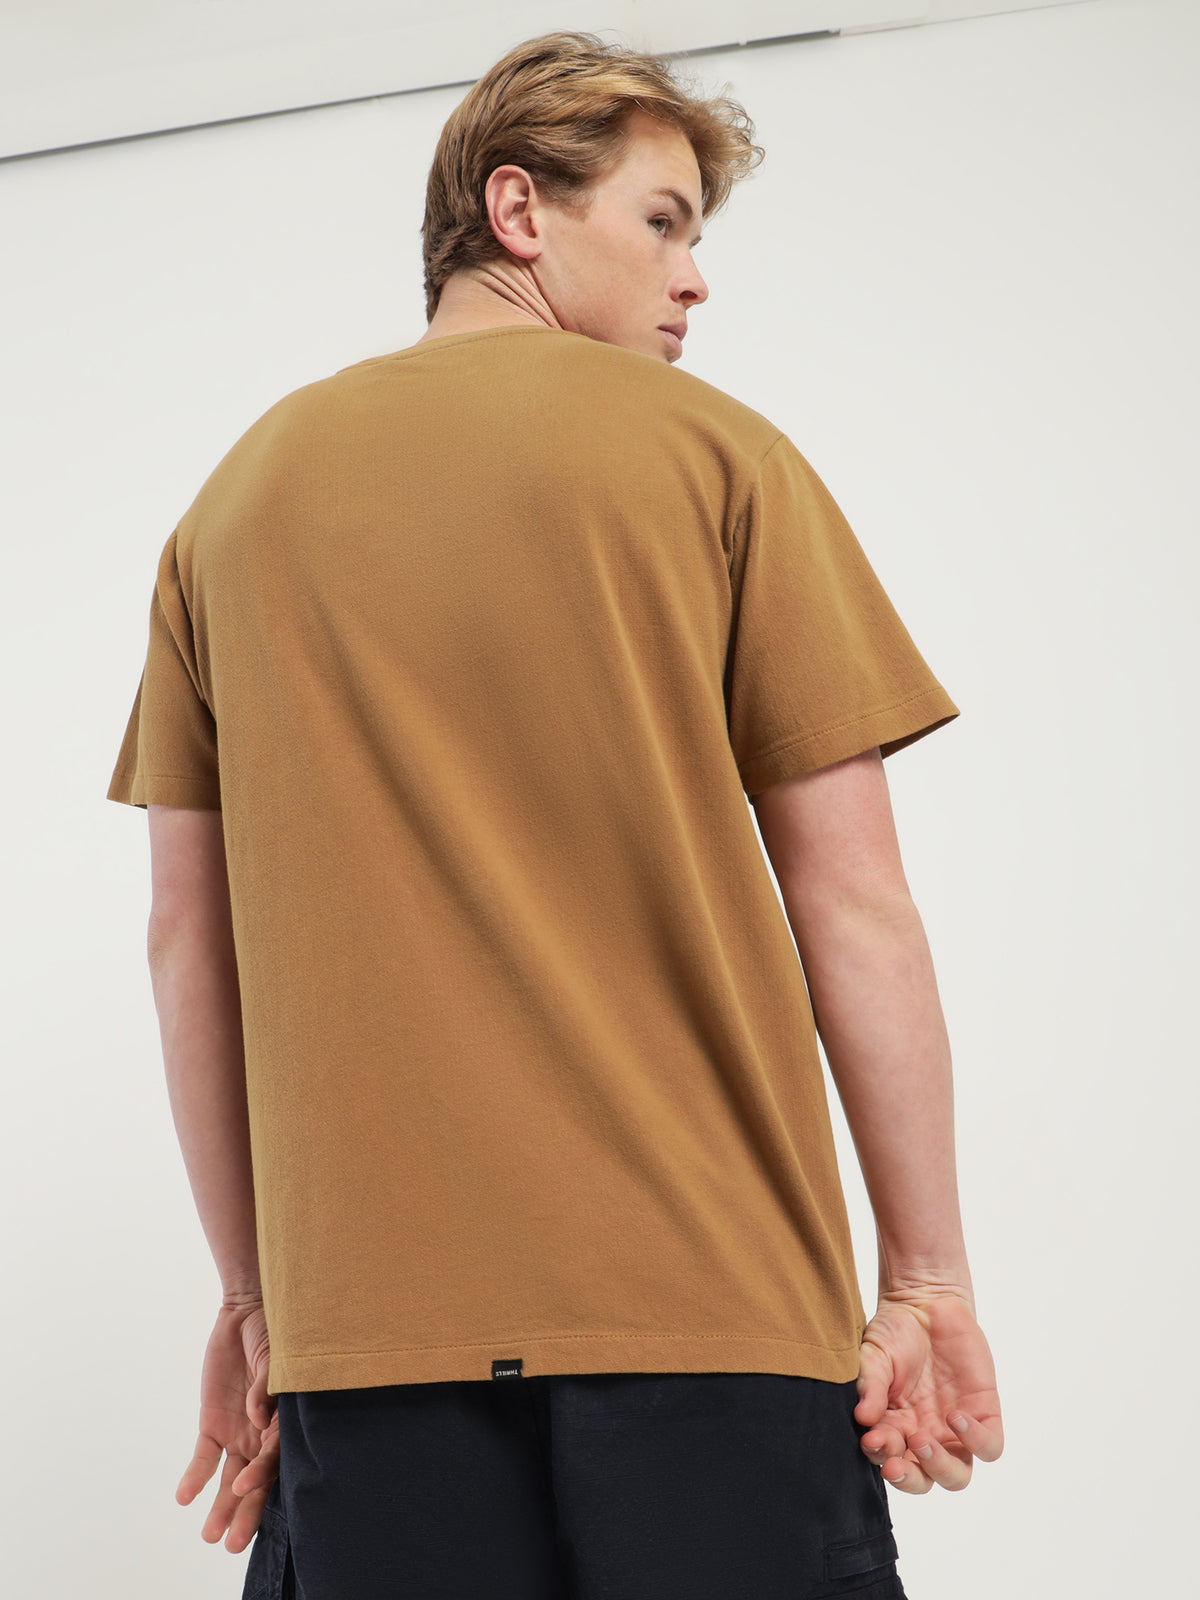 King Embro Merch Fit T-Shirt in Tobacco